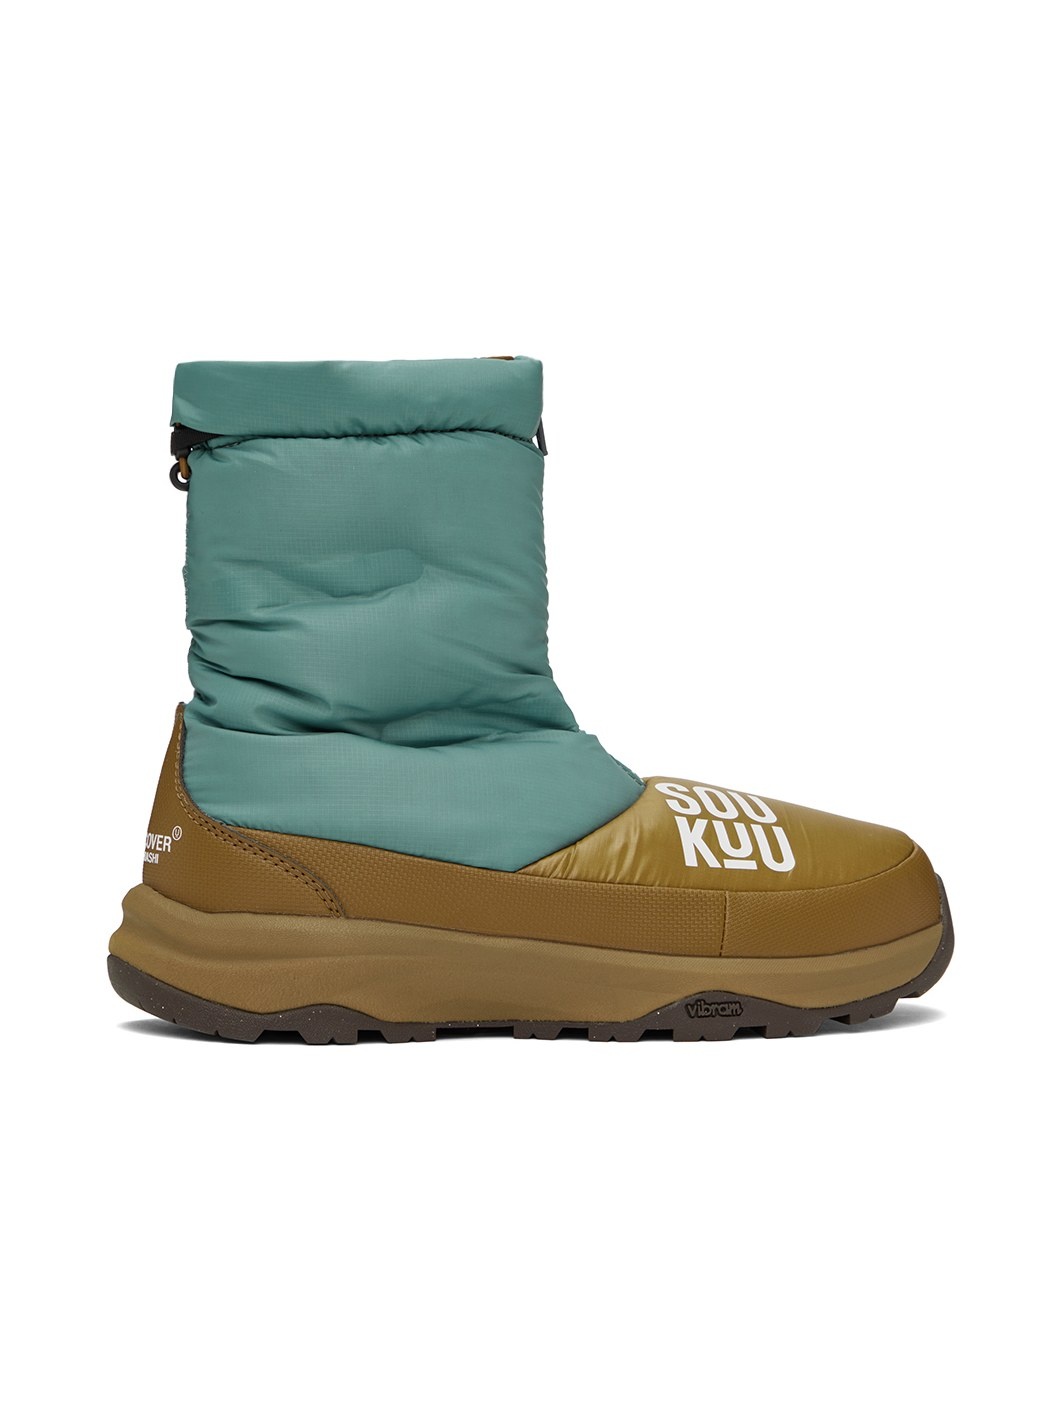 Brown The North Face Edition Soukuu Nuptse Boots - 1